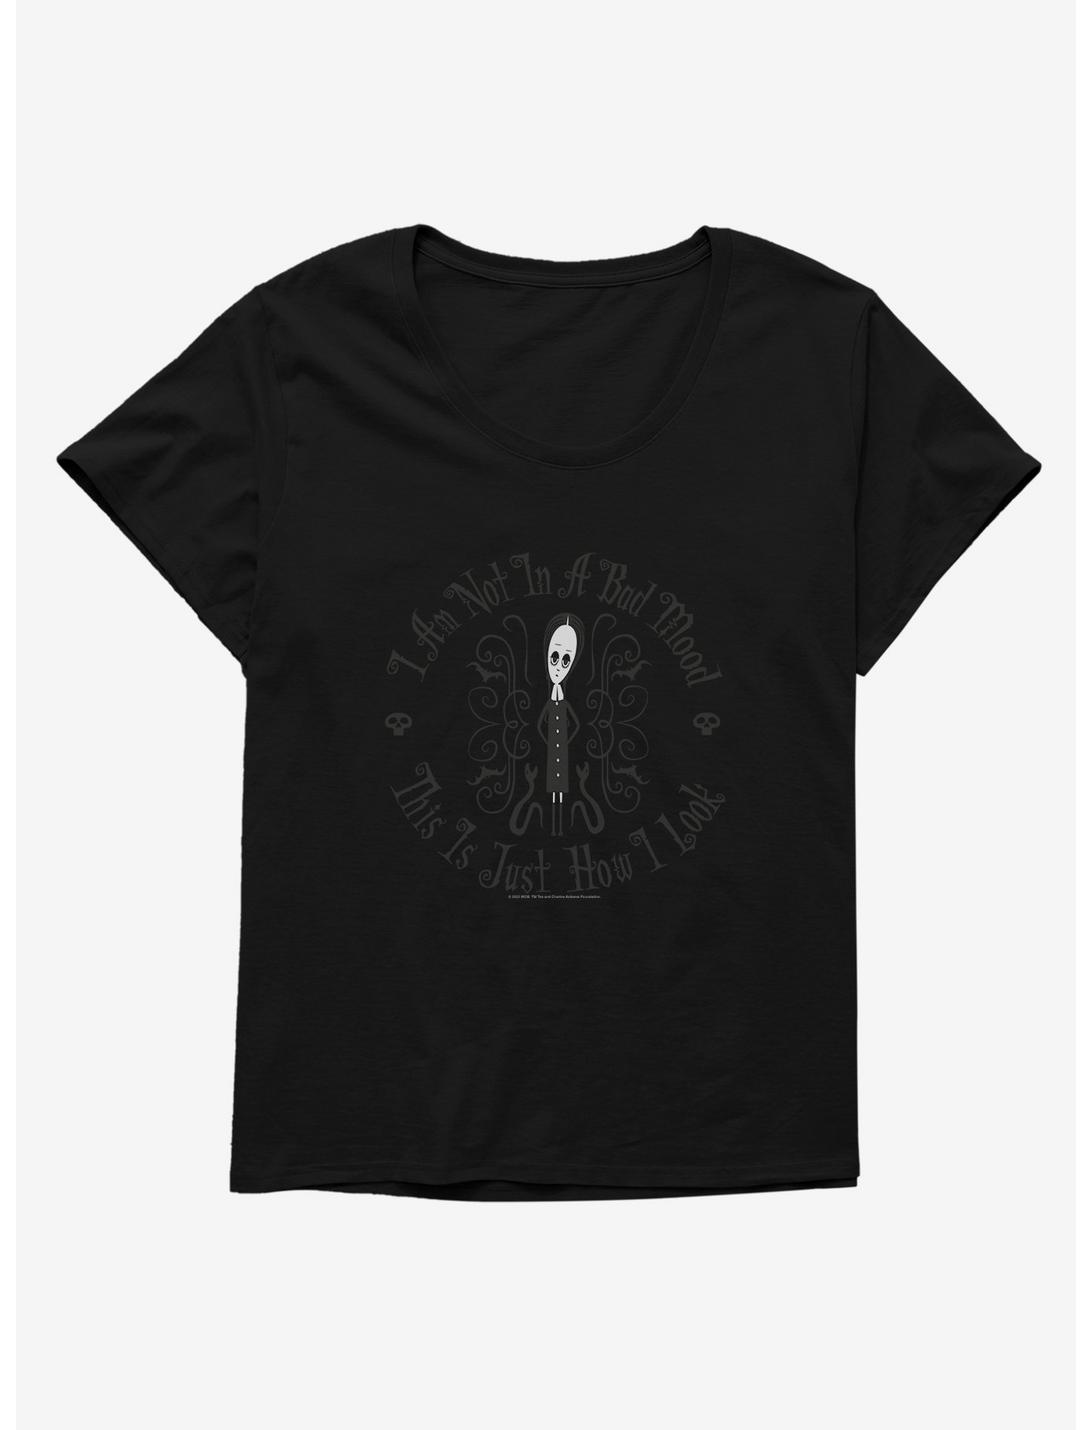 Addams Family Just How I Look Womens T-Shirt Plus Size, BLACK, hi-res